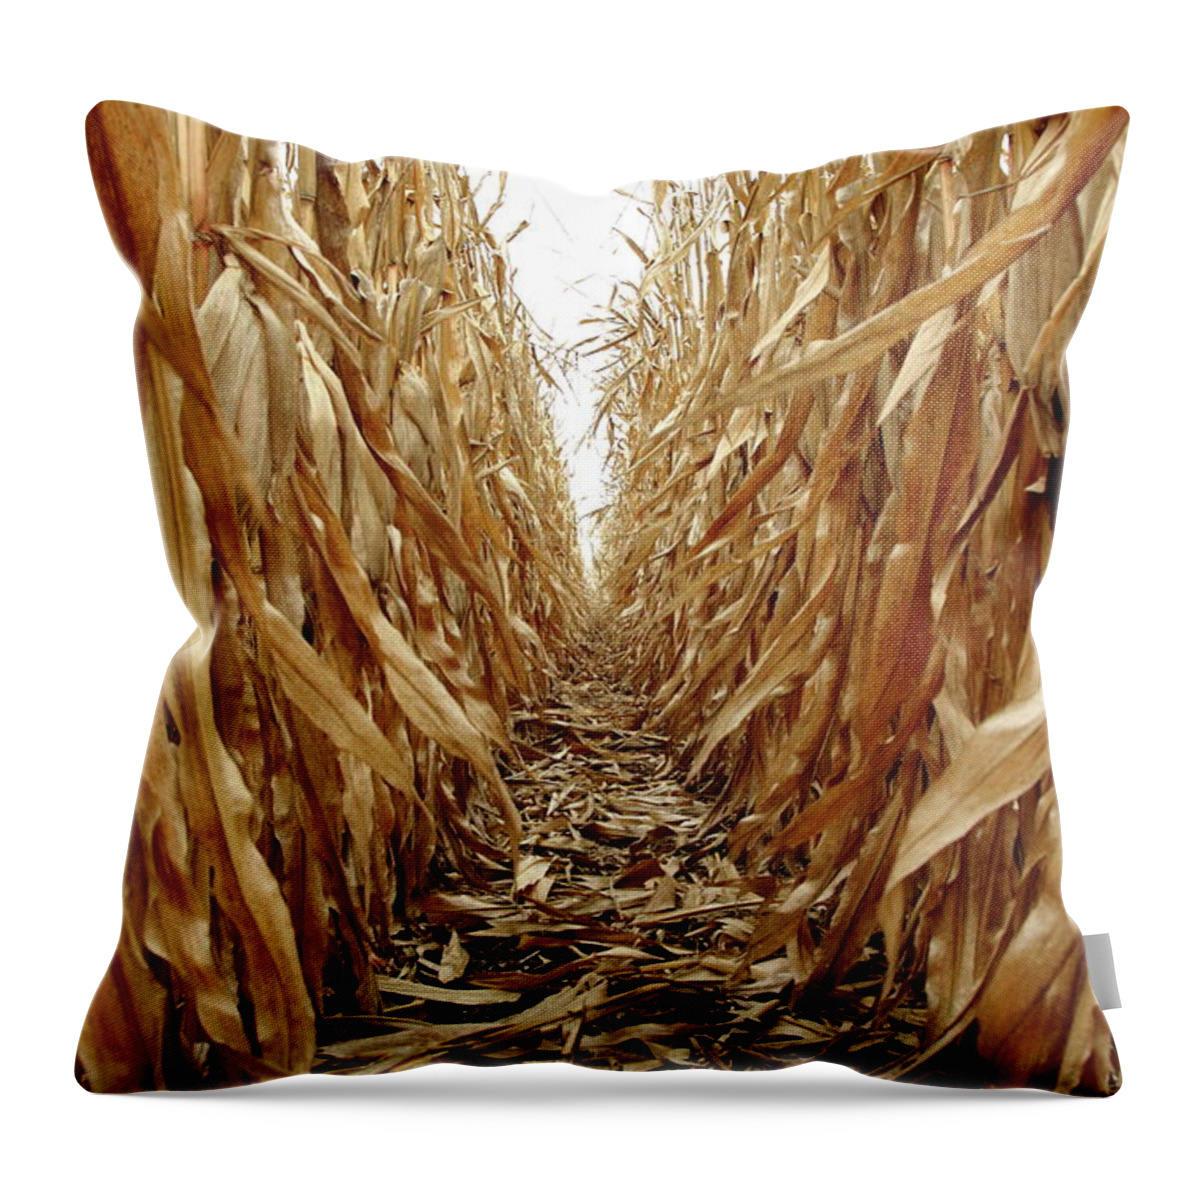 Agriculture Throw Pillow featuring the photograph Corn by Lens Art Photography By Larry Trager